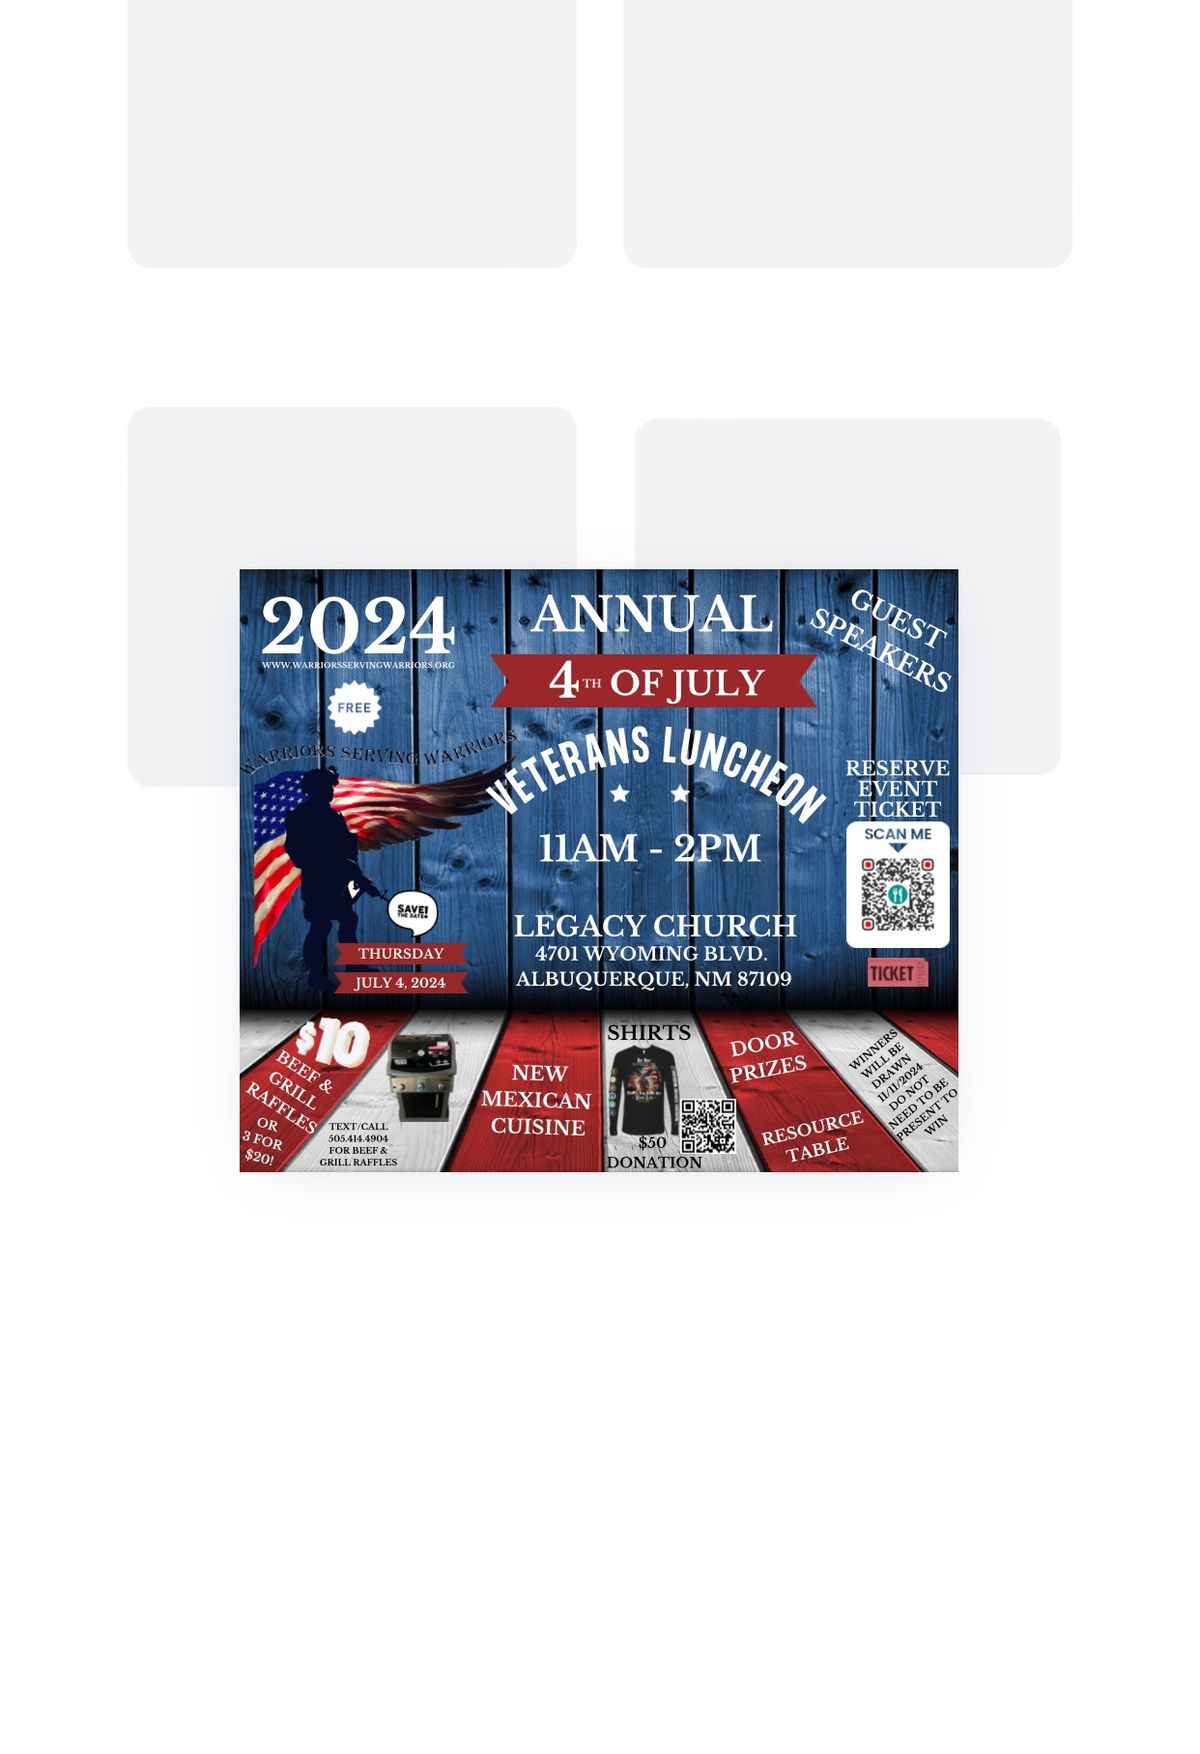 FREE Annual Veterans 4th of July Luncheon